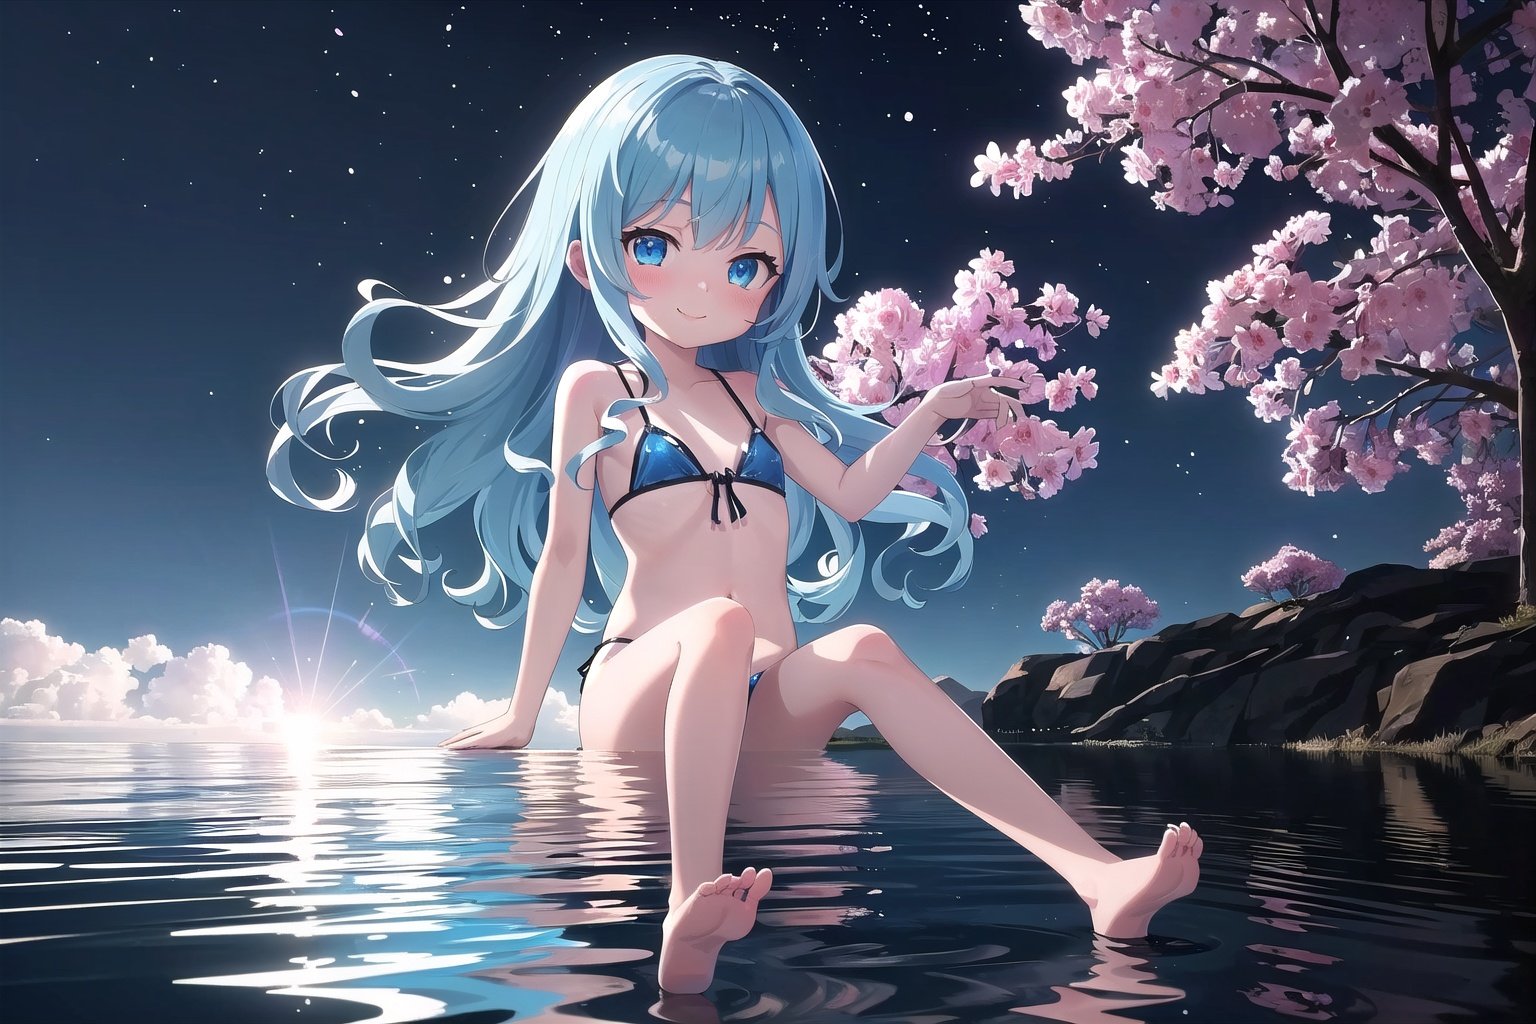 ((Movie-quality graphics))1 (loli:1.3) girl swimming in the water, she is wearing a sky blue [(see-through|spaghetti strap bikini|nude)] long hair, blue hair, eyes,(full body:1.3), delicate face.((Super detailed)), (highest quality), (photos:1.1), (exquisite 3D modeling),(( super detailed wallpapers,)) ((animated illustrations)), ((masterpieces)), ((masterpieces)),((Shy expression, smile, slightly red face))